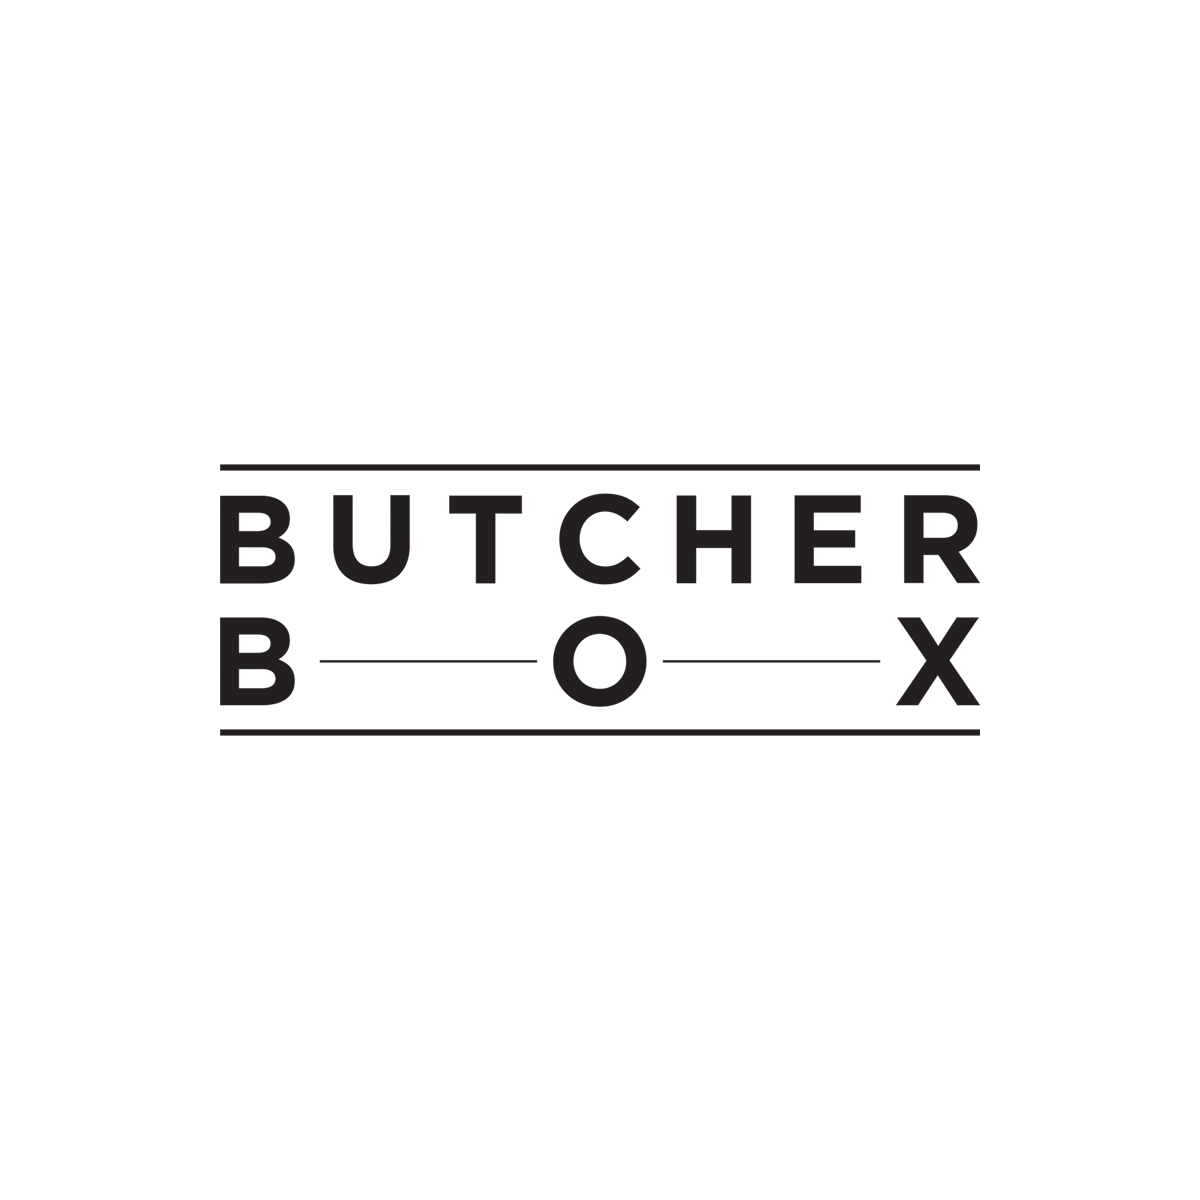 ButcherBox Promo Code For Free Bacon, 10 Off, And Free